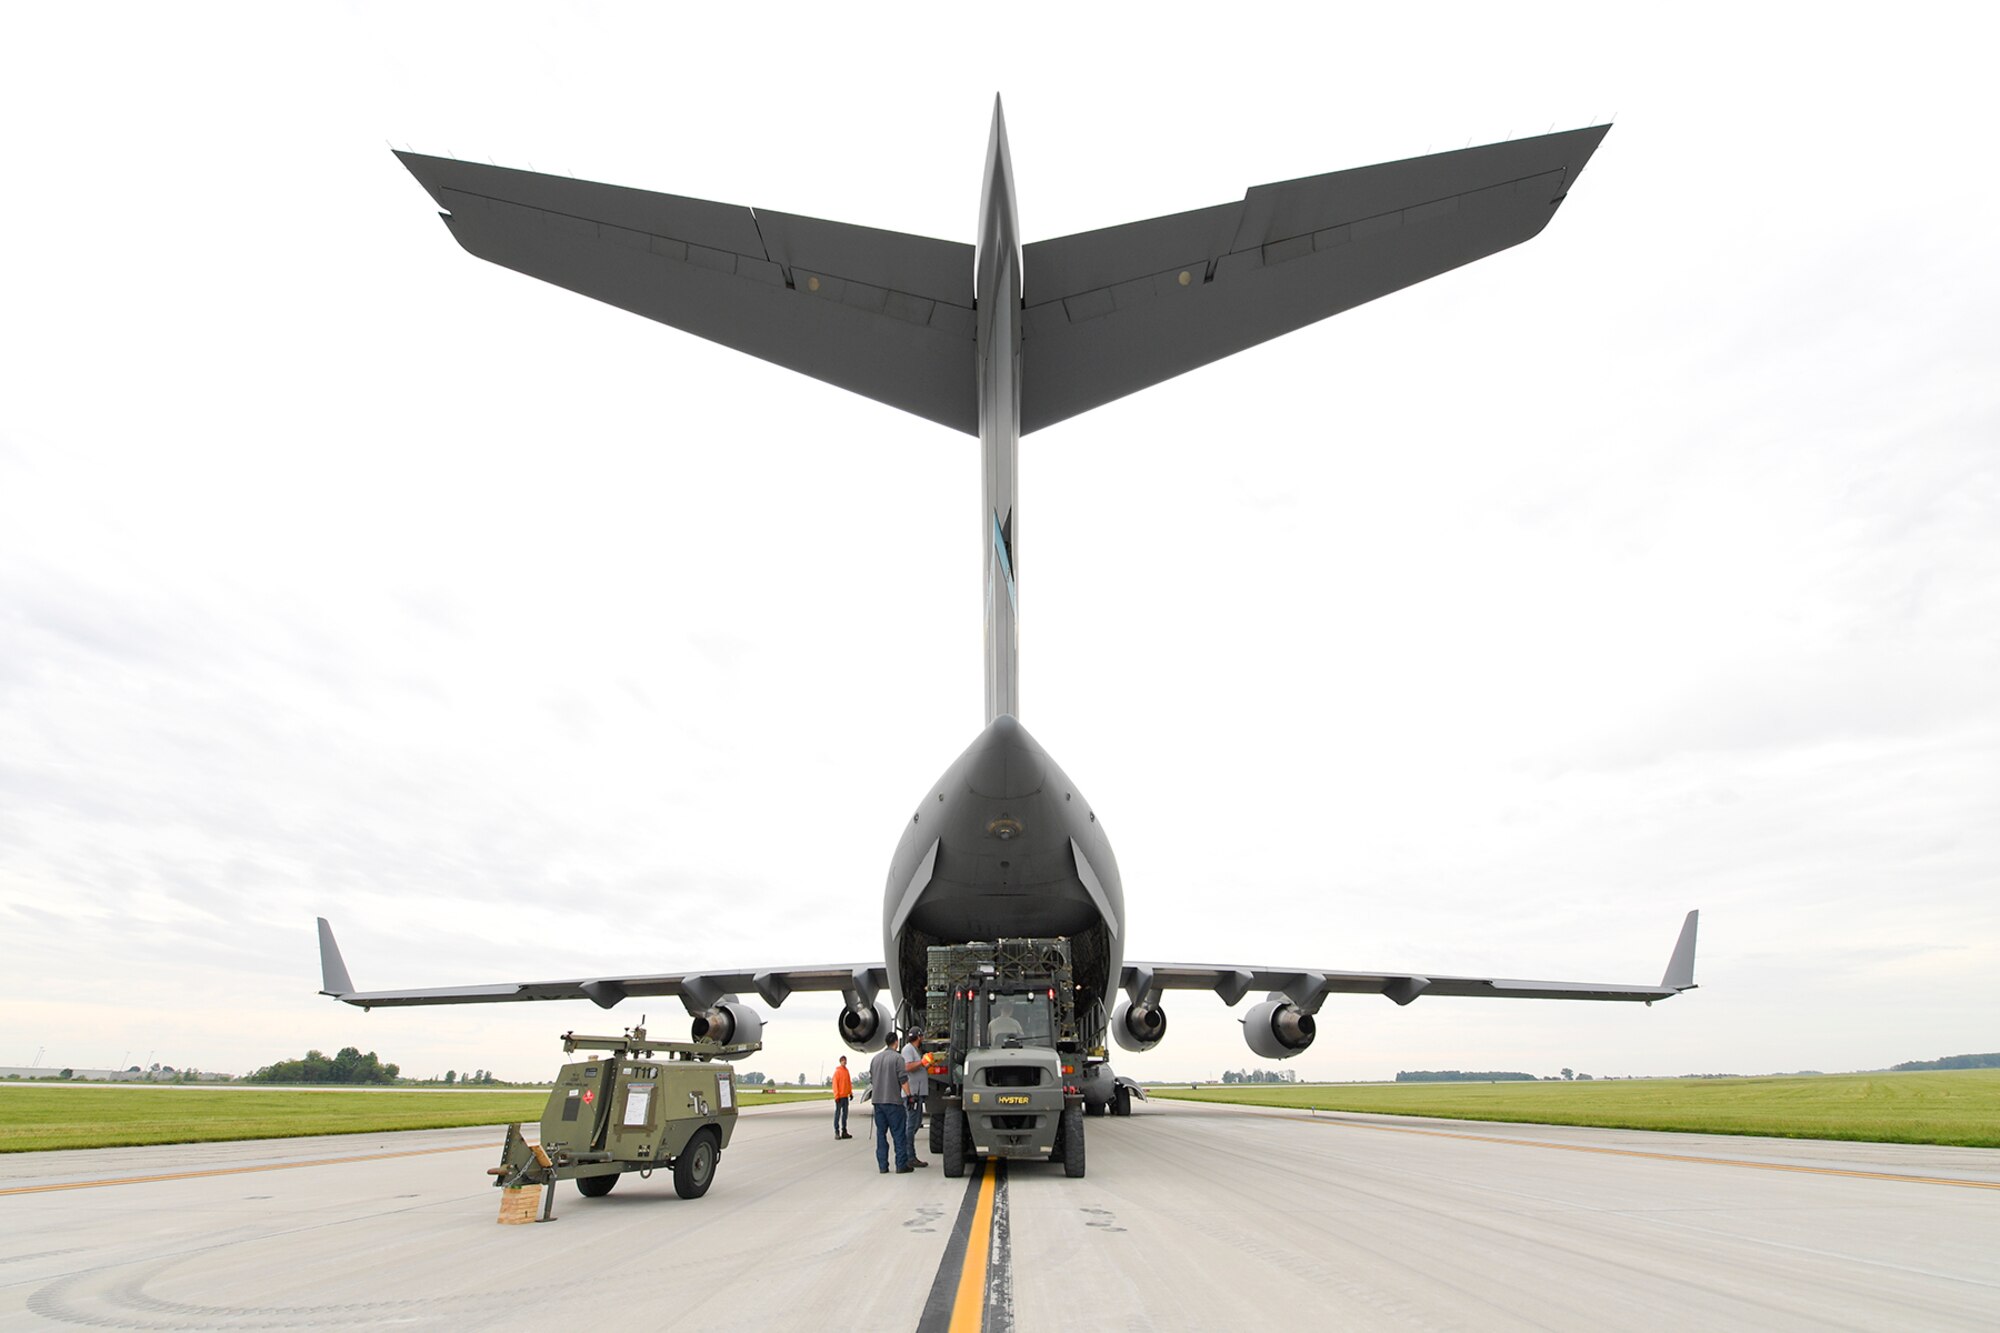 Cargo from Grissom is loaded onto a Hawaii-bound C-17 Globemaster III from Dover AFB, Del., June 1, 2021. Members of the Detachment 1, 622nd Contingency Equipment Group stationed at Grissom palletized and oversaw the cargo shipment for exercise Pacific Warriorz 2021. (U.S. Air Force photo/Staff Sgt. Chris Massey)